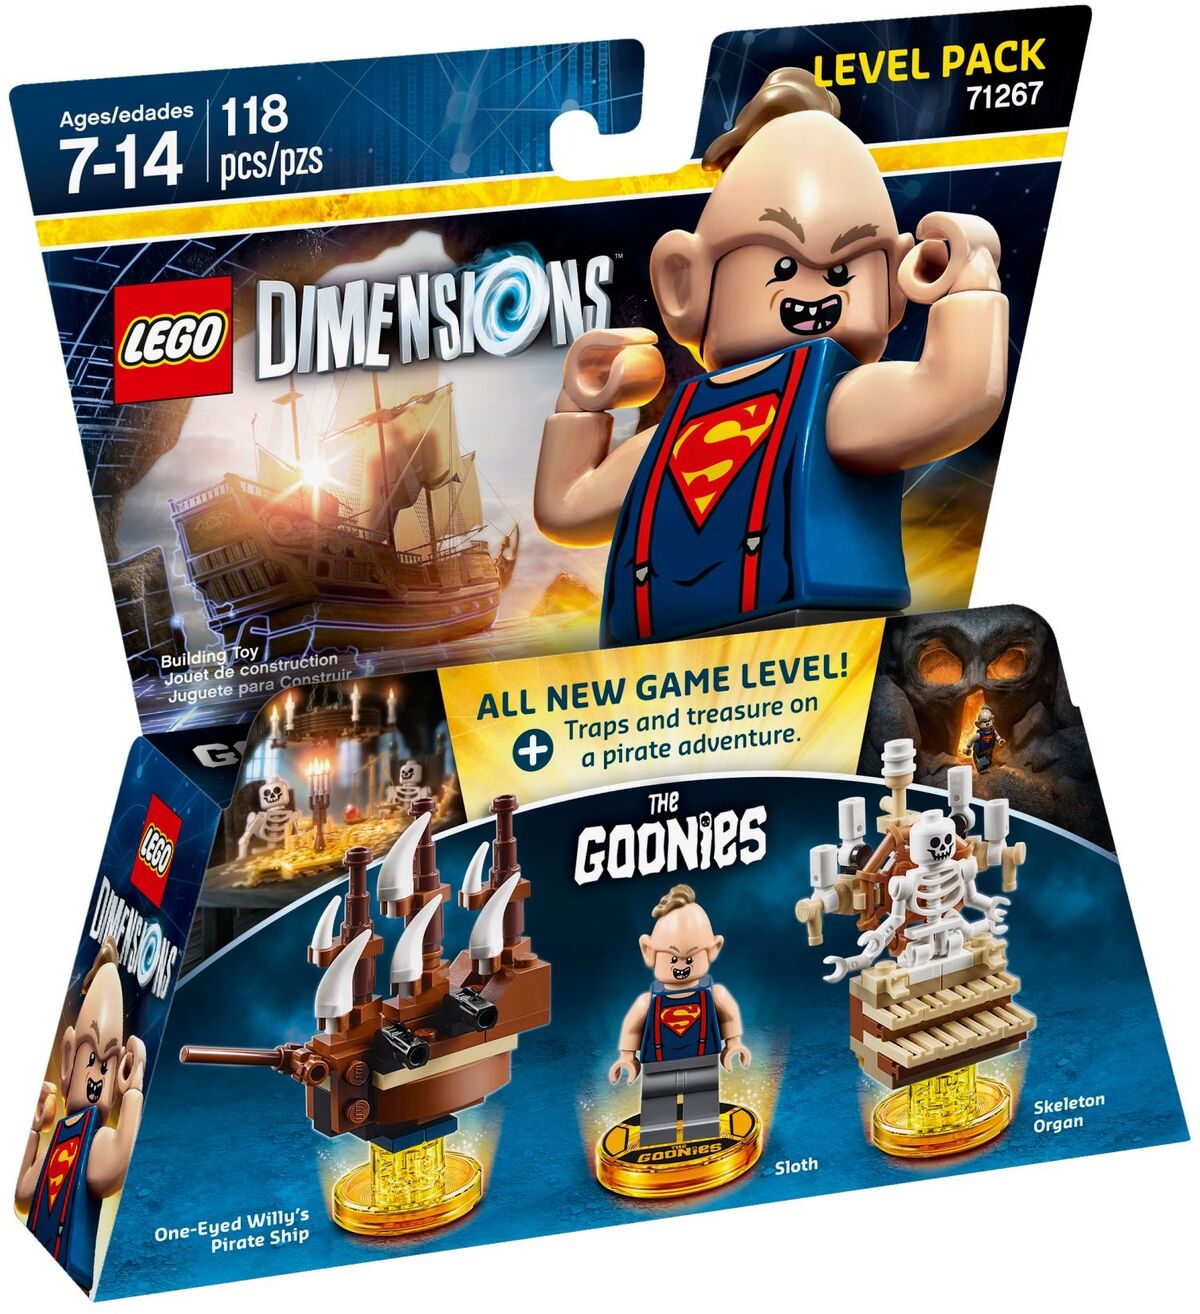 LEGO Dimensions Sonic The Hedgehog Level Pack (Universal) 